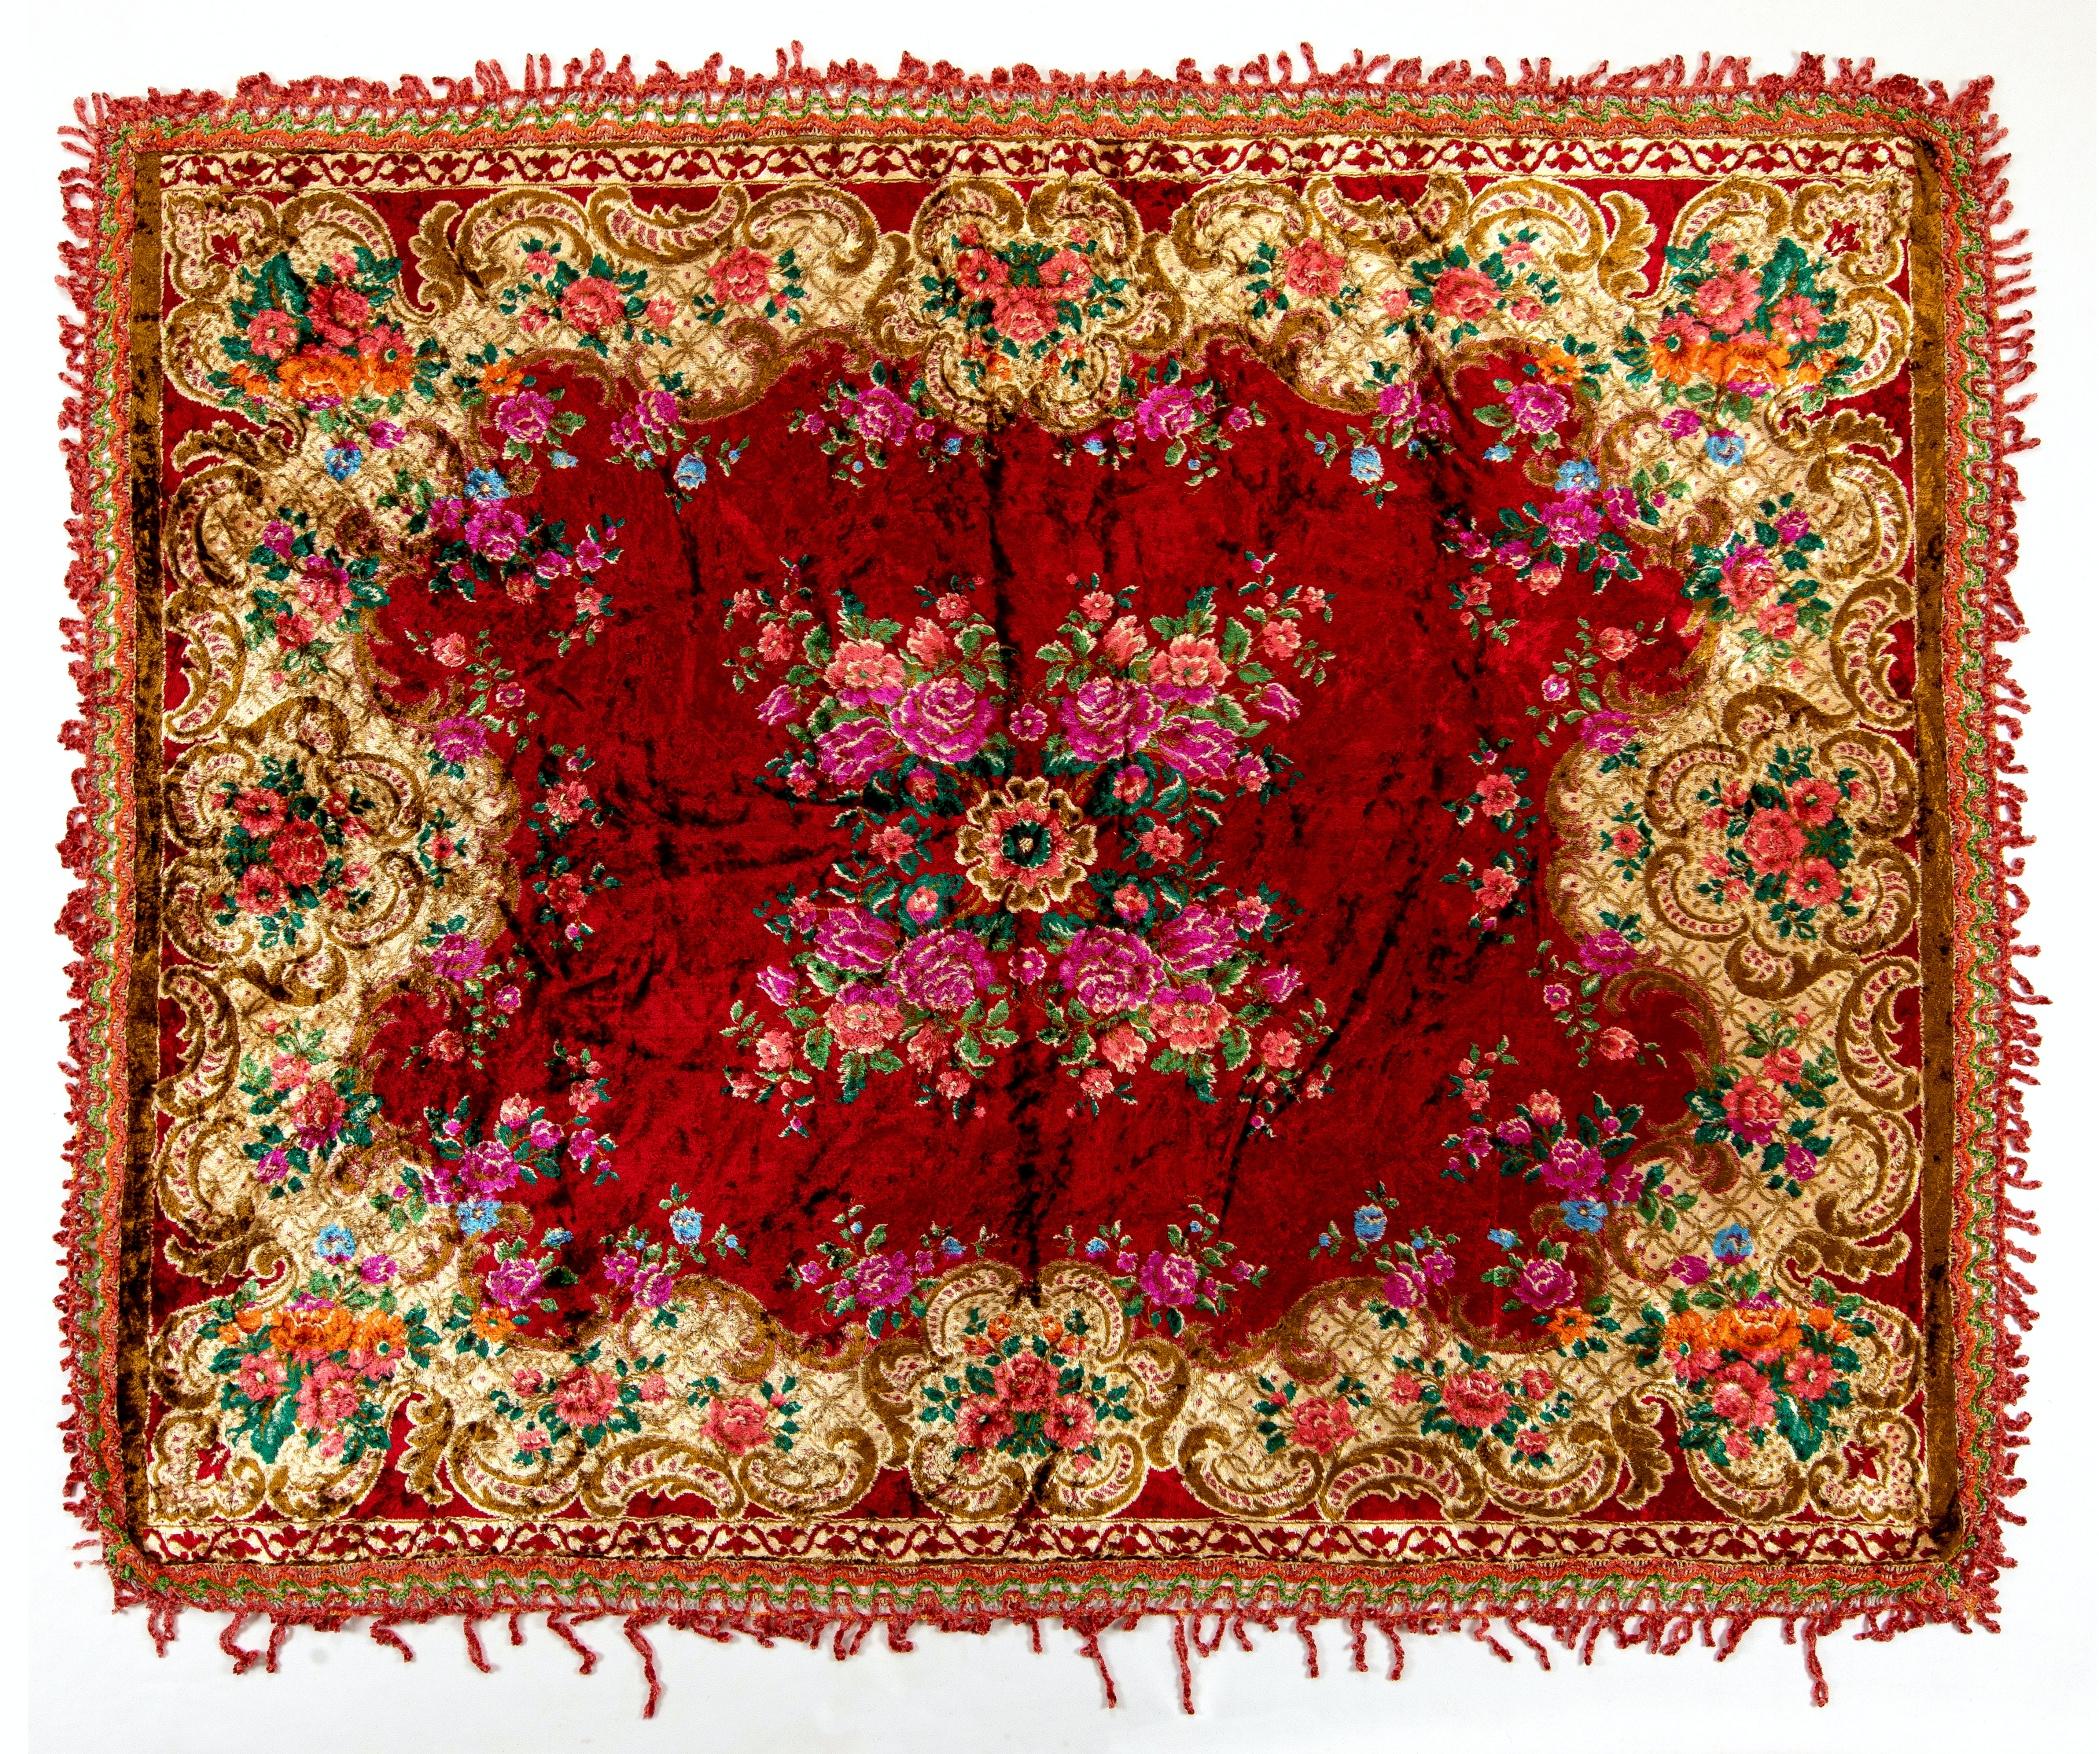 Cotton 6.3x7.6 Ft Vintage Floral Moldovan Velvet Table Cover with Crochet Border